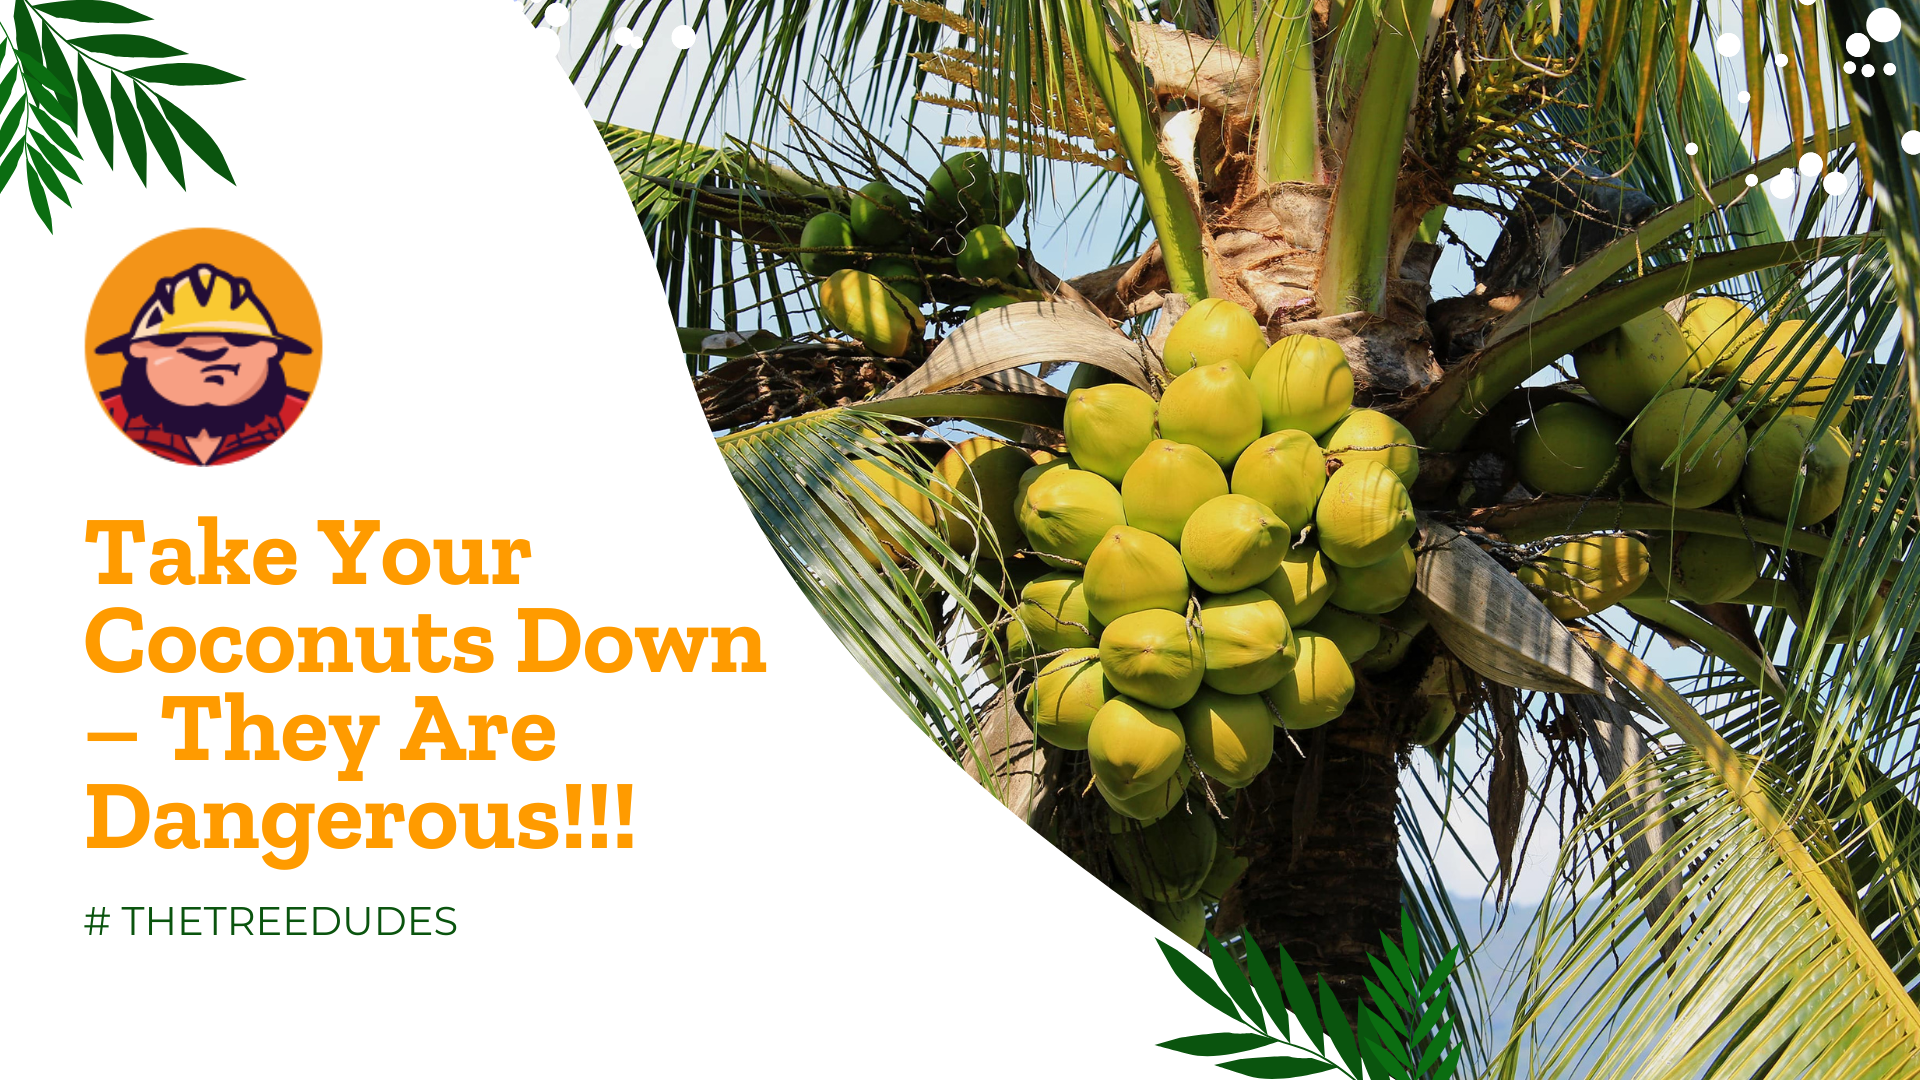 Take Your Coconuts Down - They Are Dangerous!!!